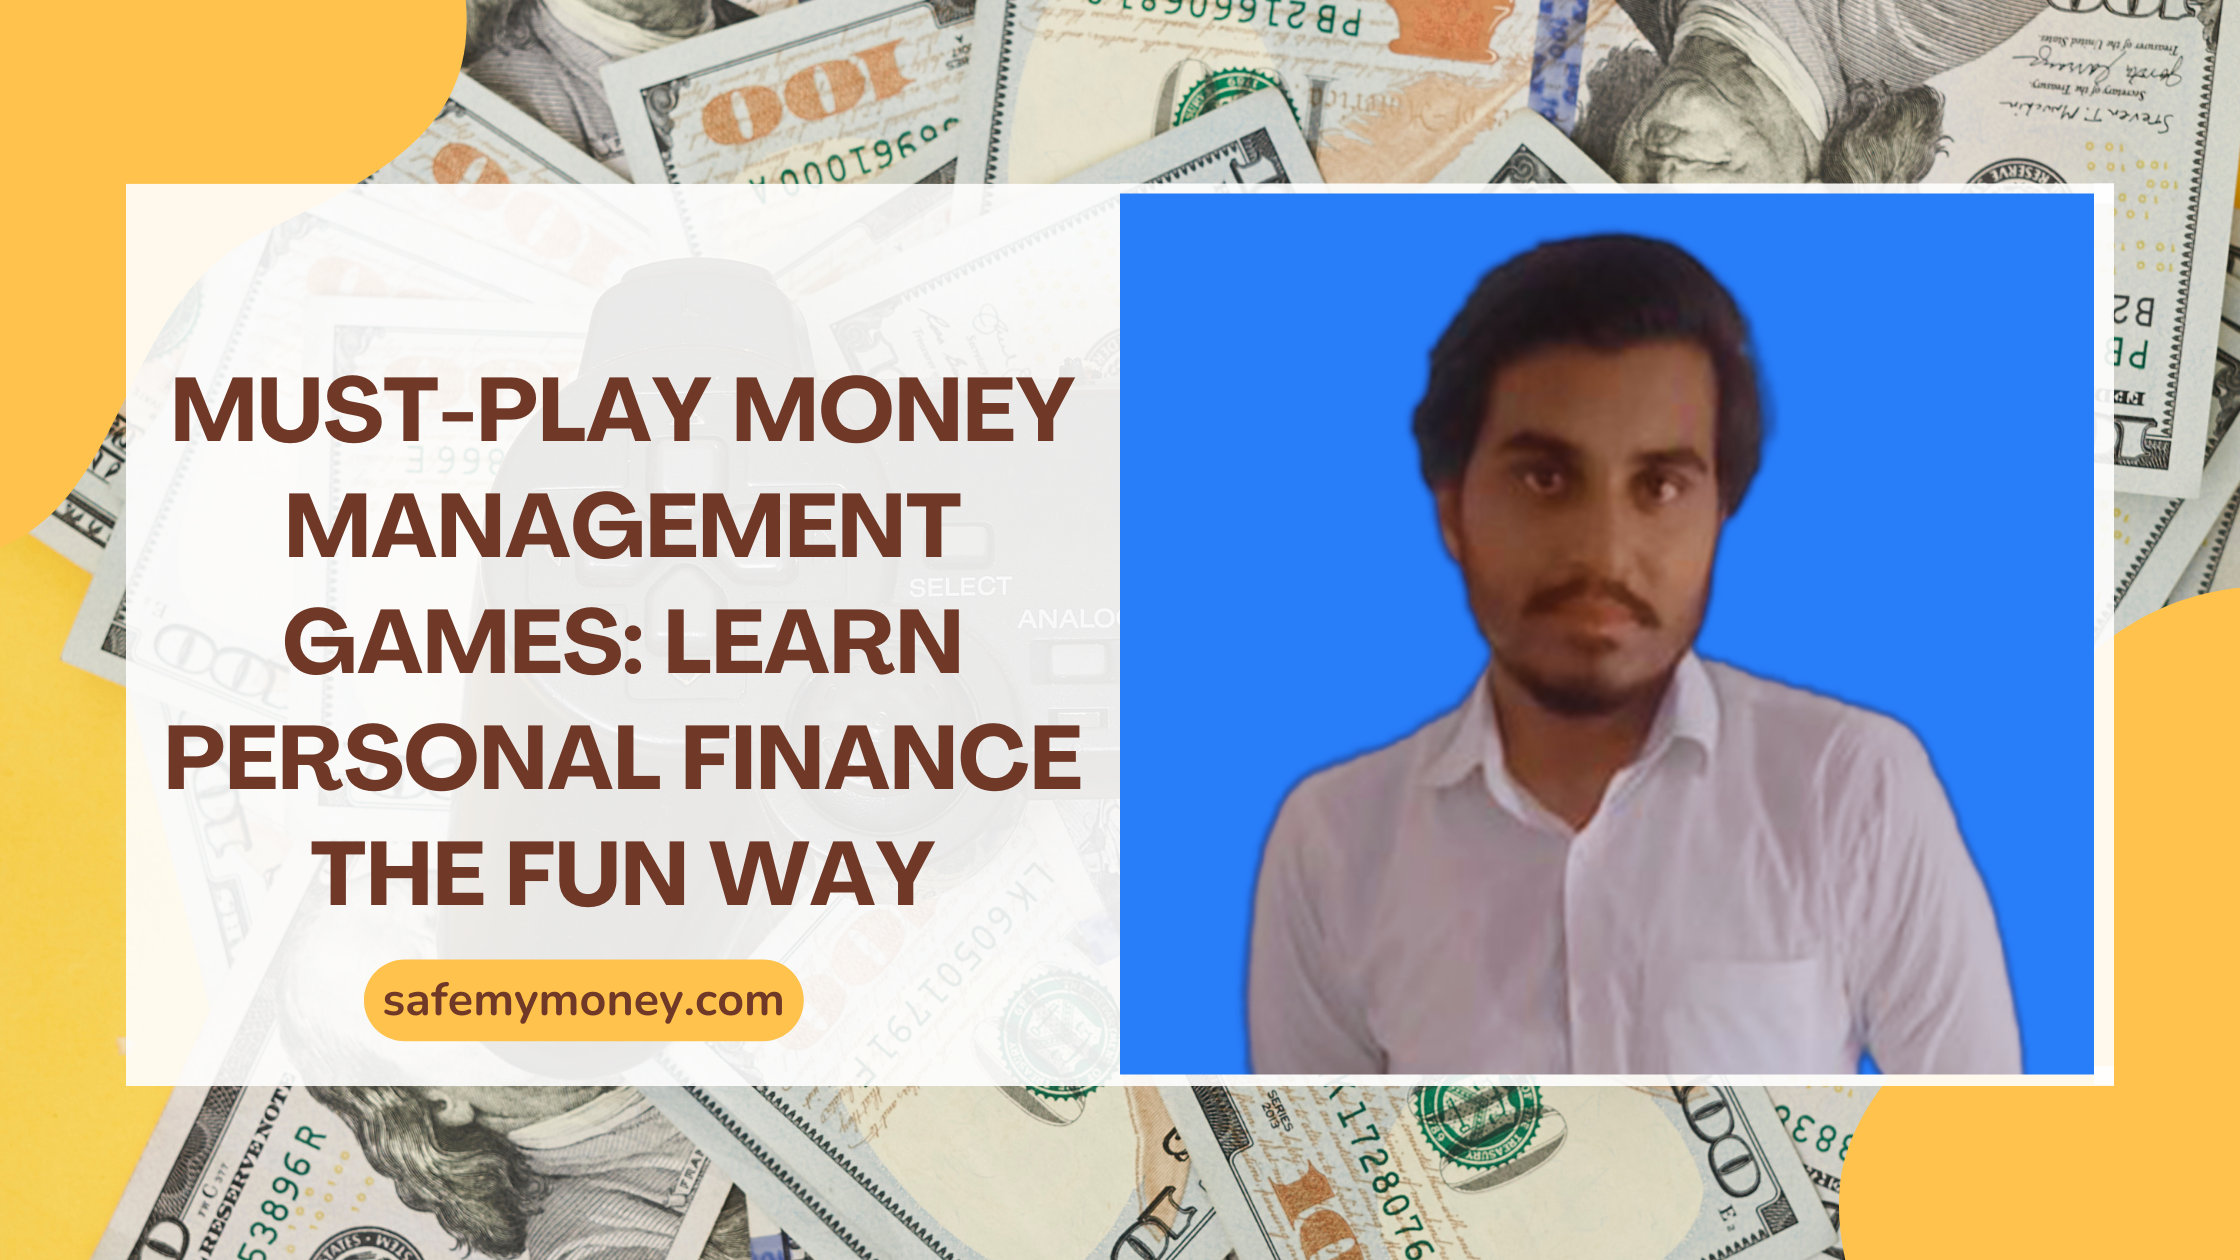 Must-Play Money Management Games Learn Personal Finance the Fun Way